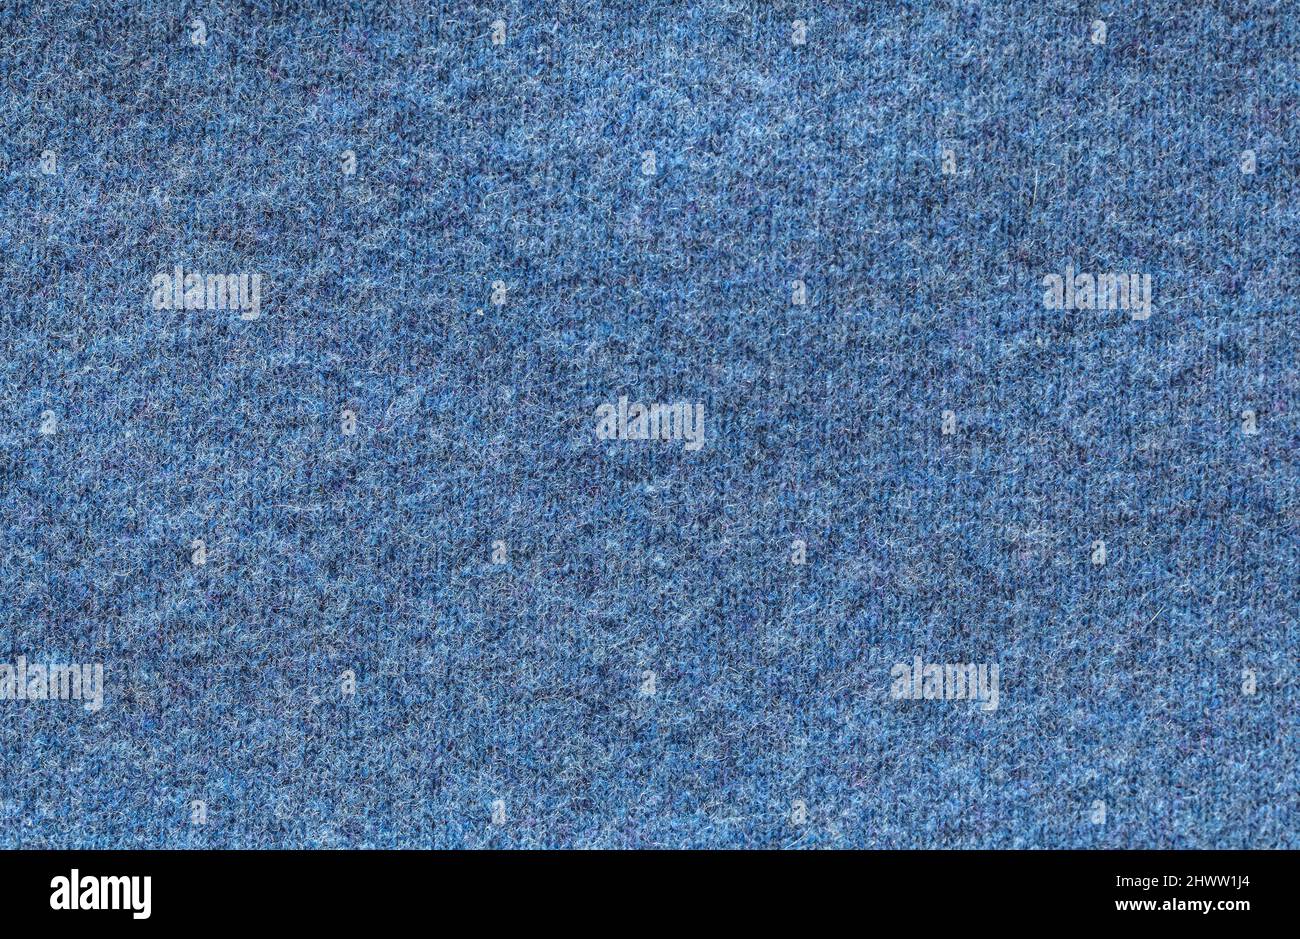 https://c8.alamy.com/comp/2HWW1J4/blue-elastic-fabric-texture-closeup-detail-can-be-used-as-background-2HWW1J4.jpg